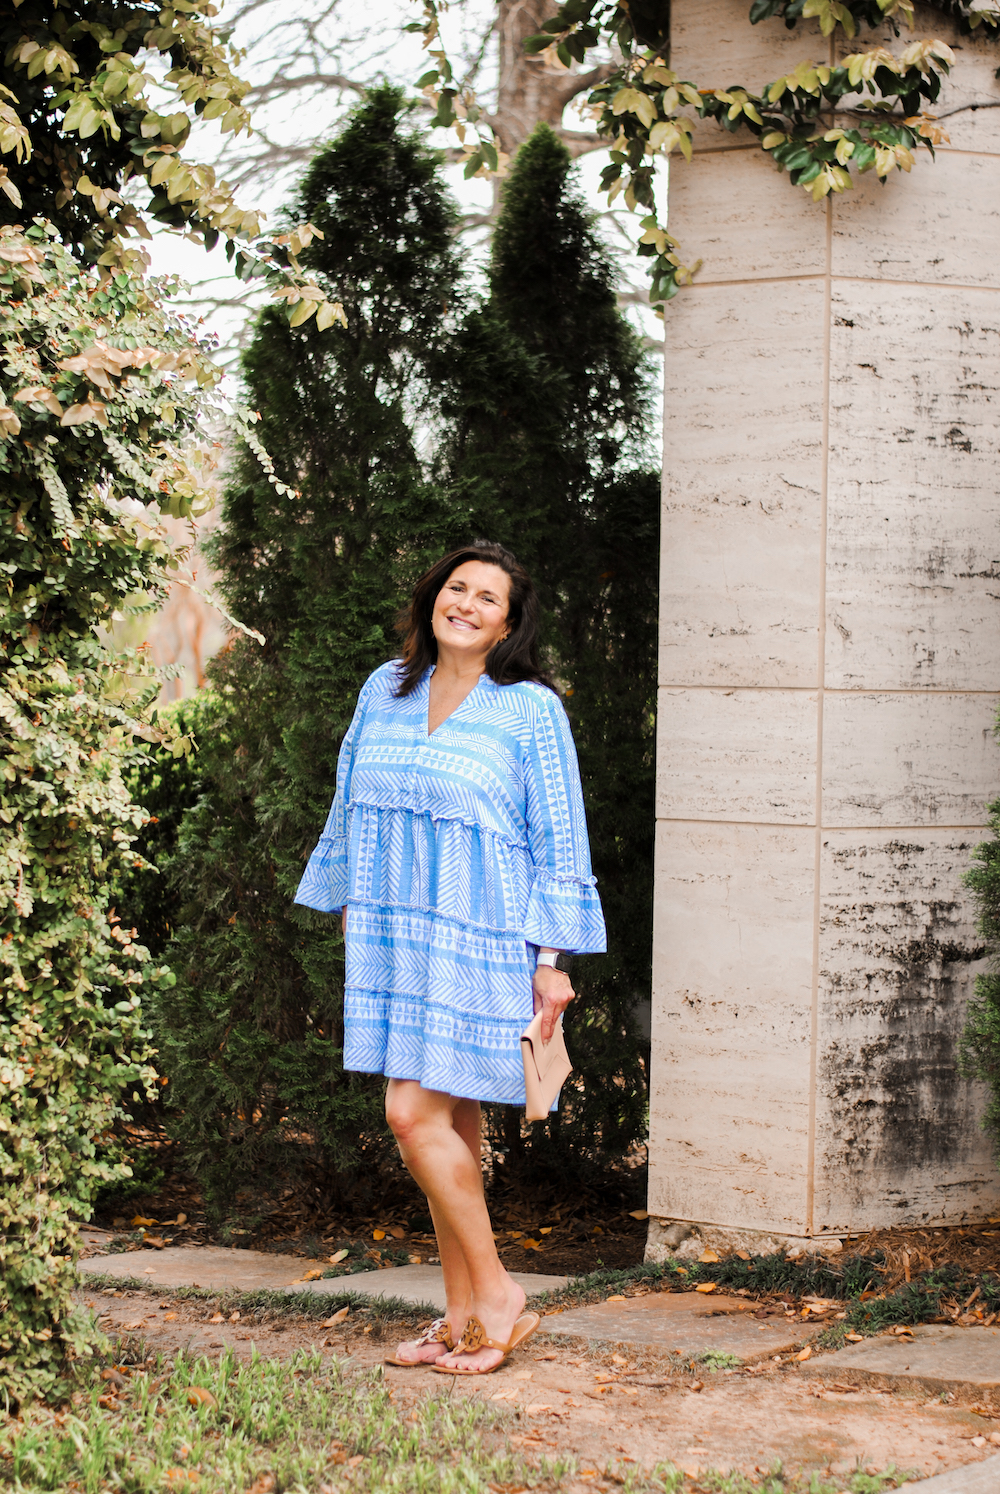 Mudpie Dress for Spring 2021 - The Stylin educator